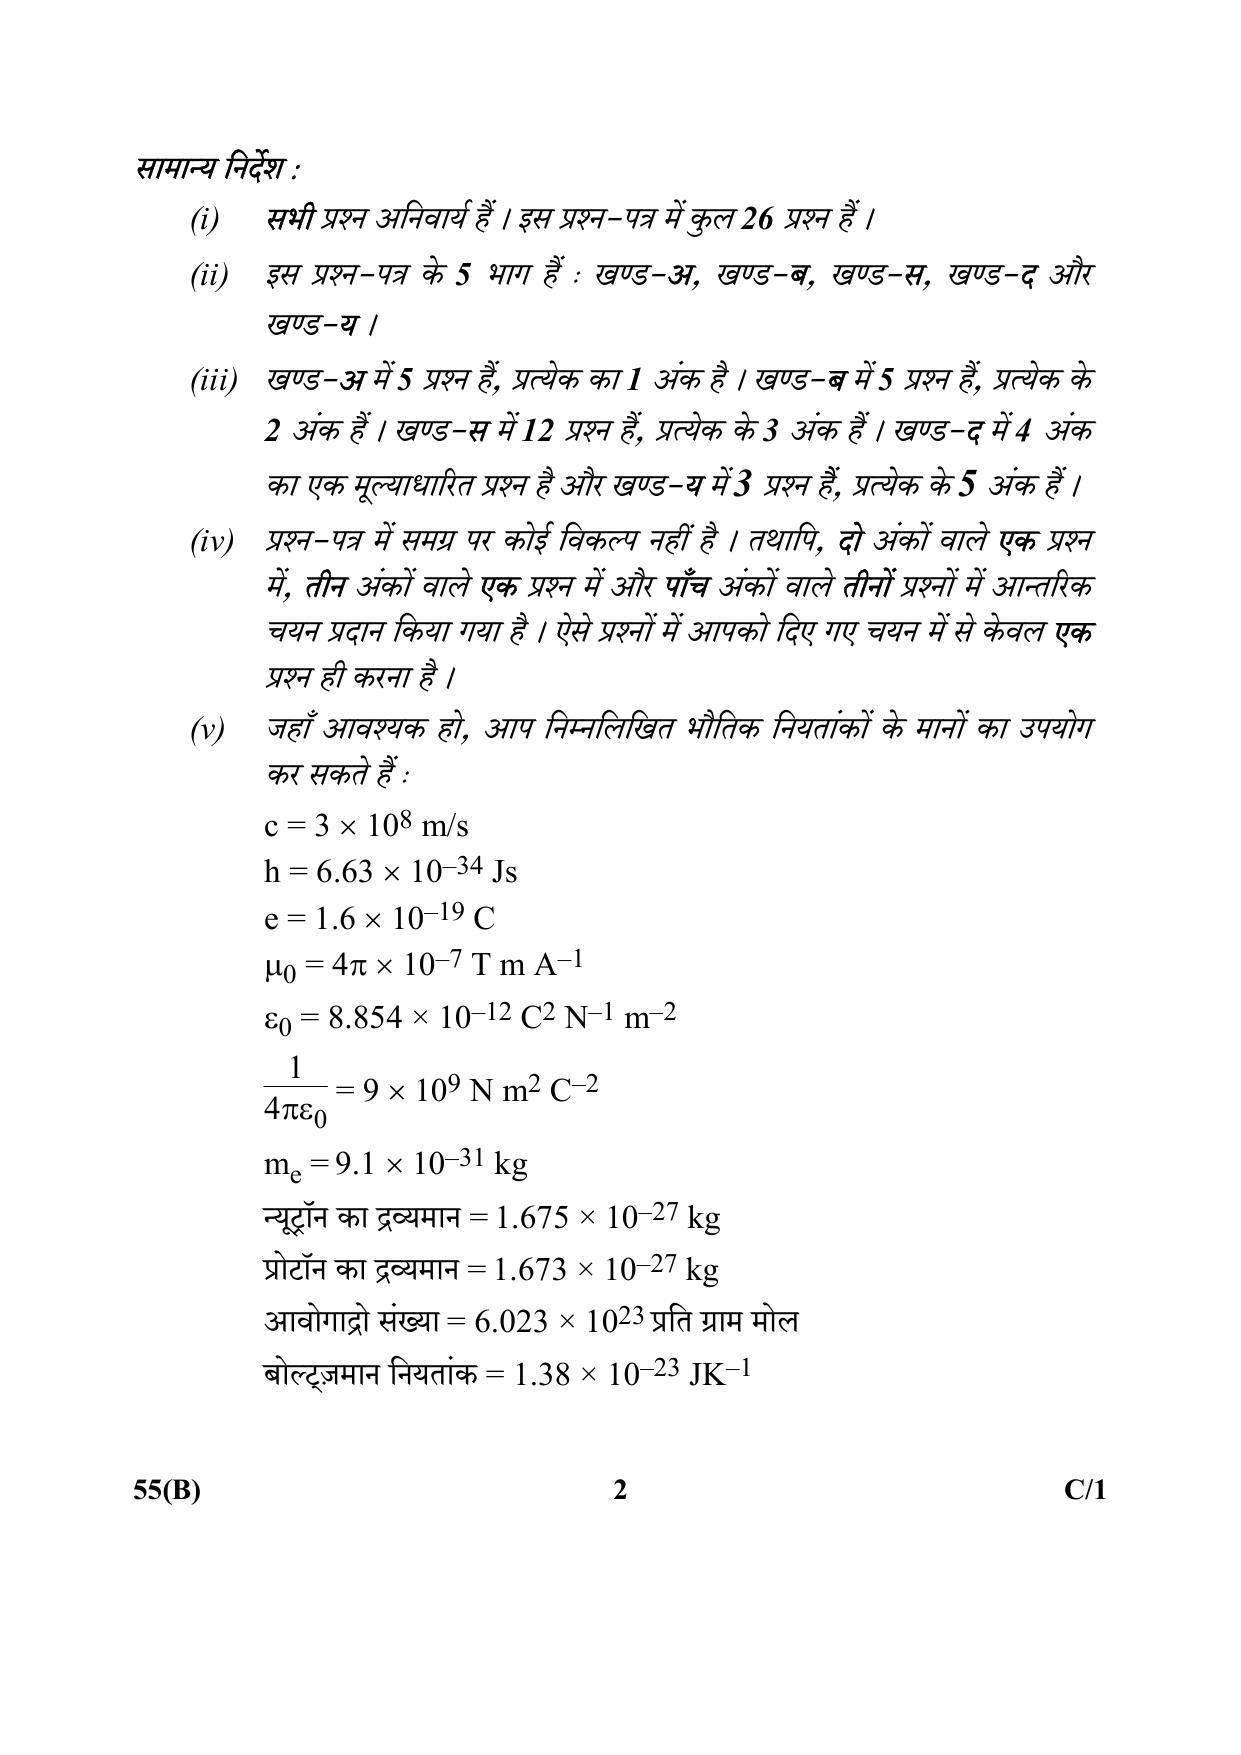 CBSE Class 12 55(B) (Physics) 2018 Compartment Question Paper - Page 2